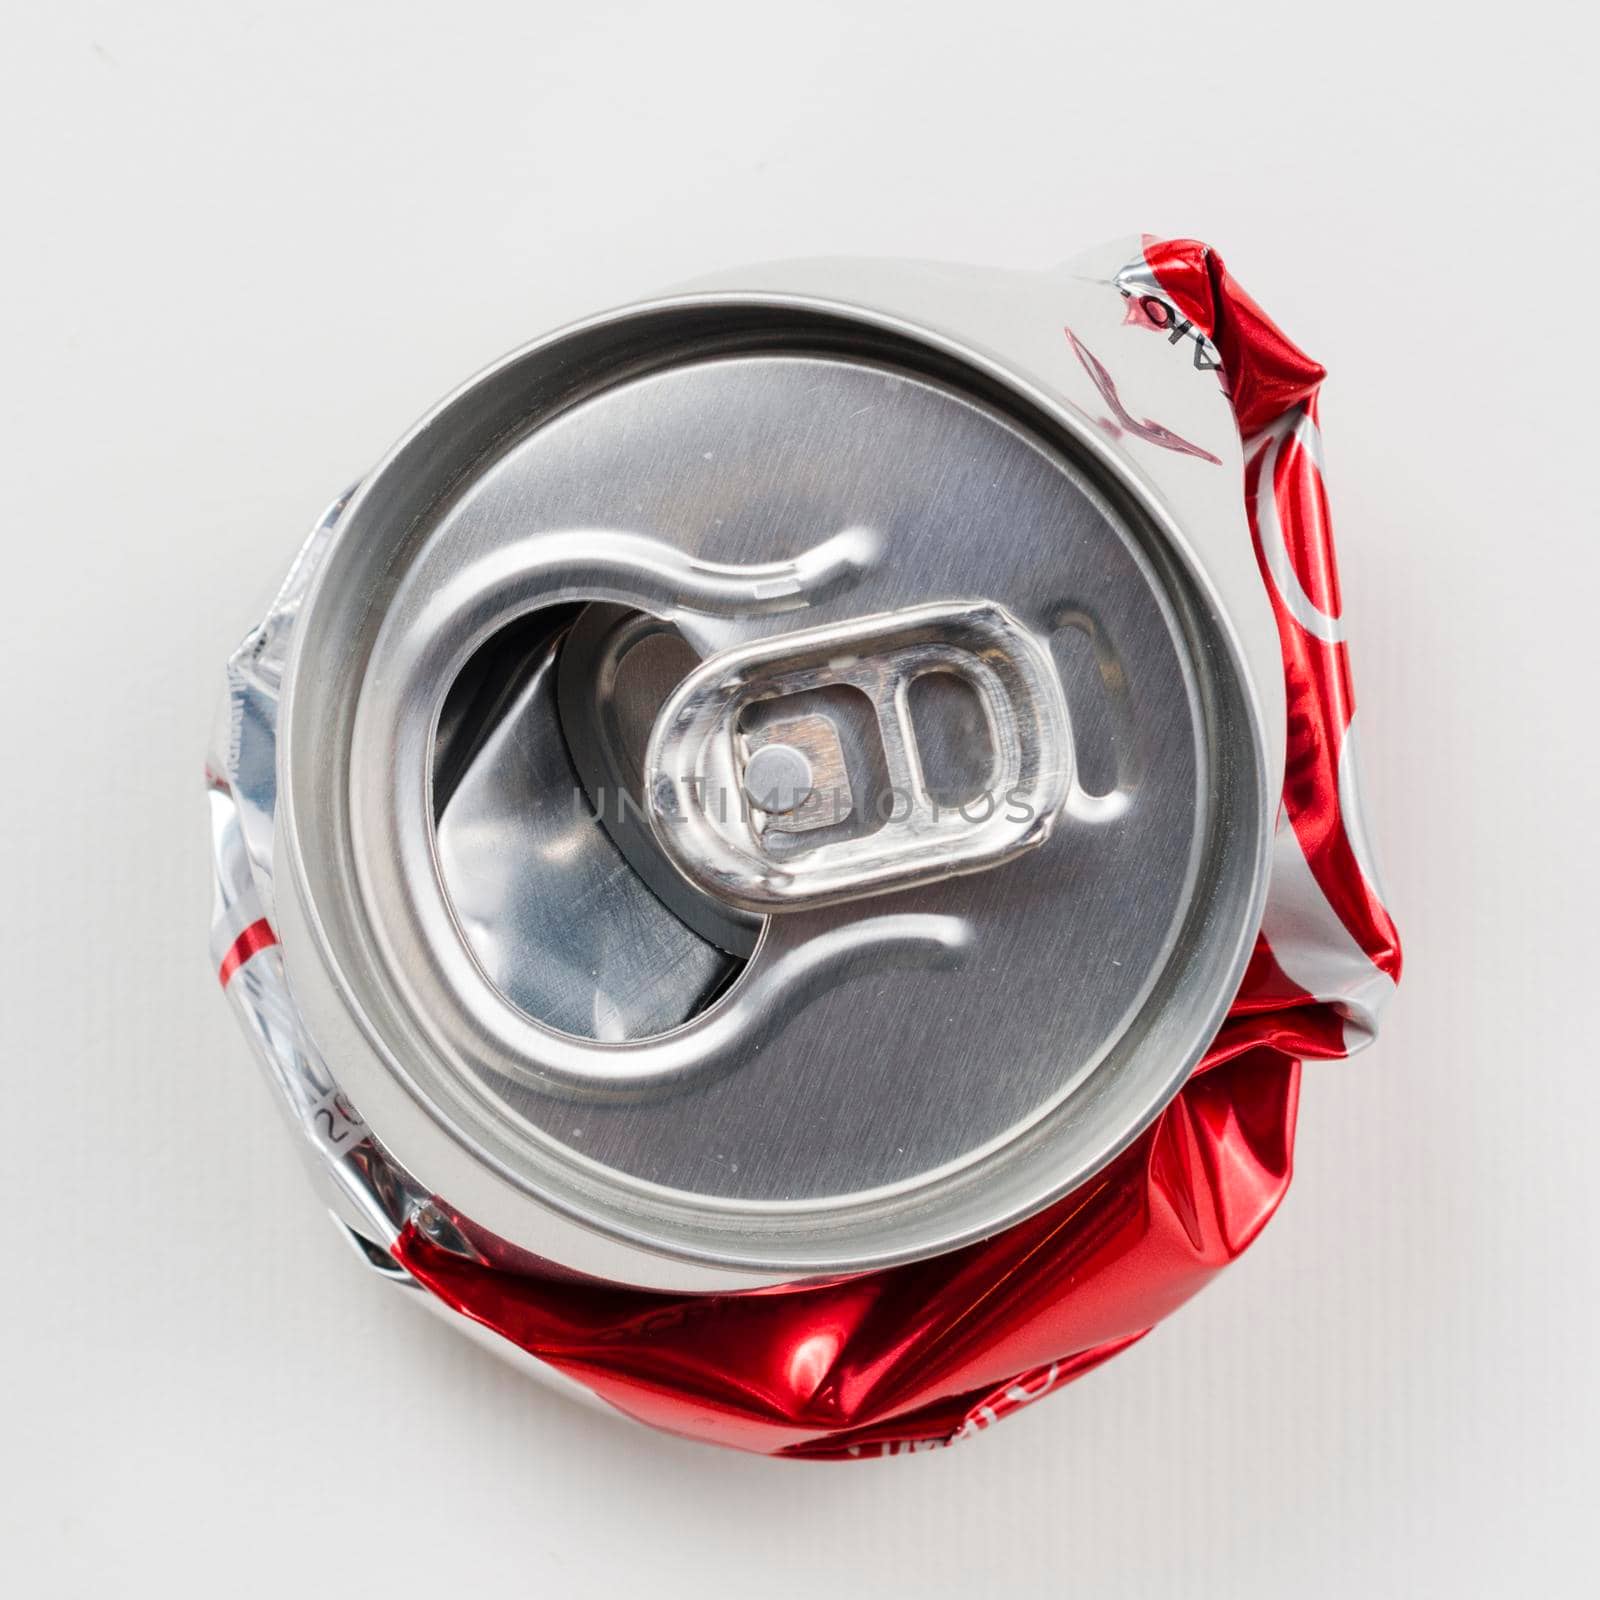 crumpled drink can grey background. High quality photo by Zahard